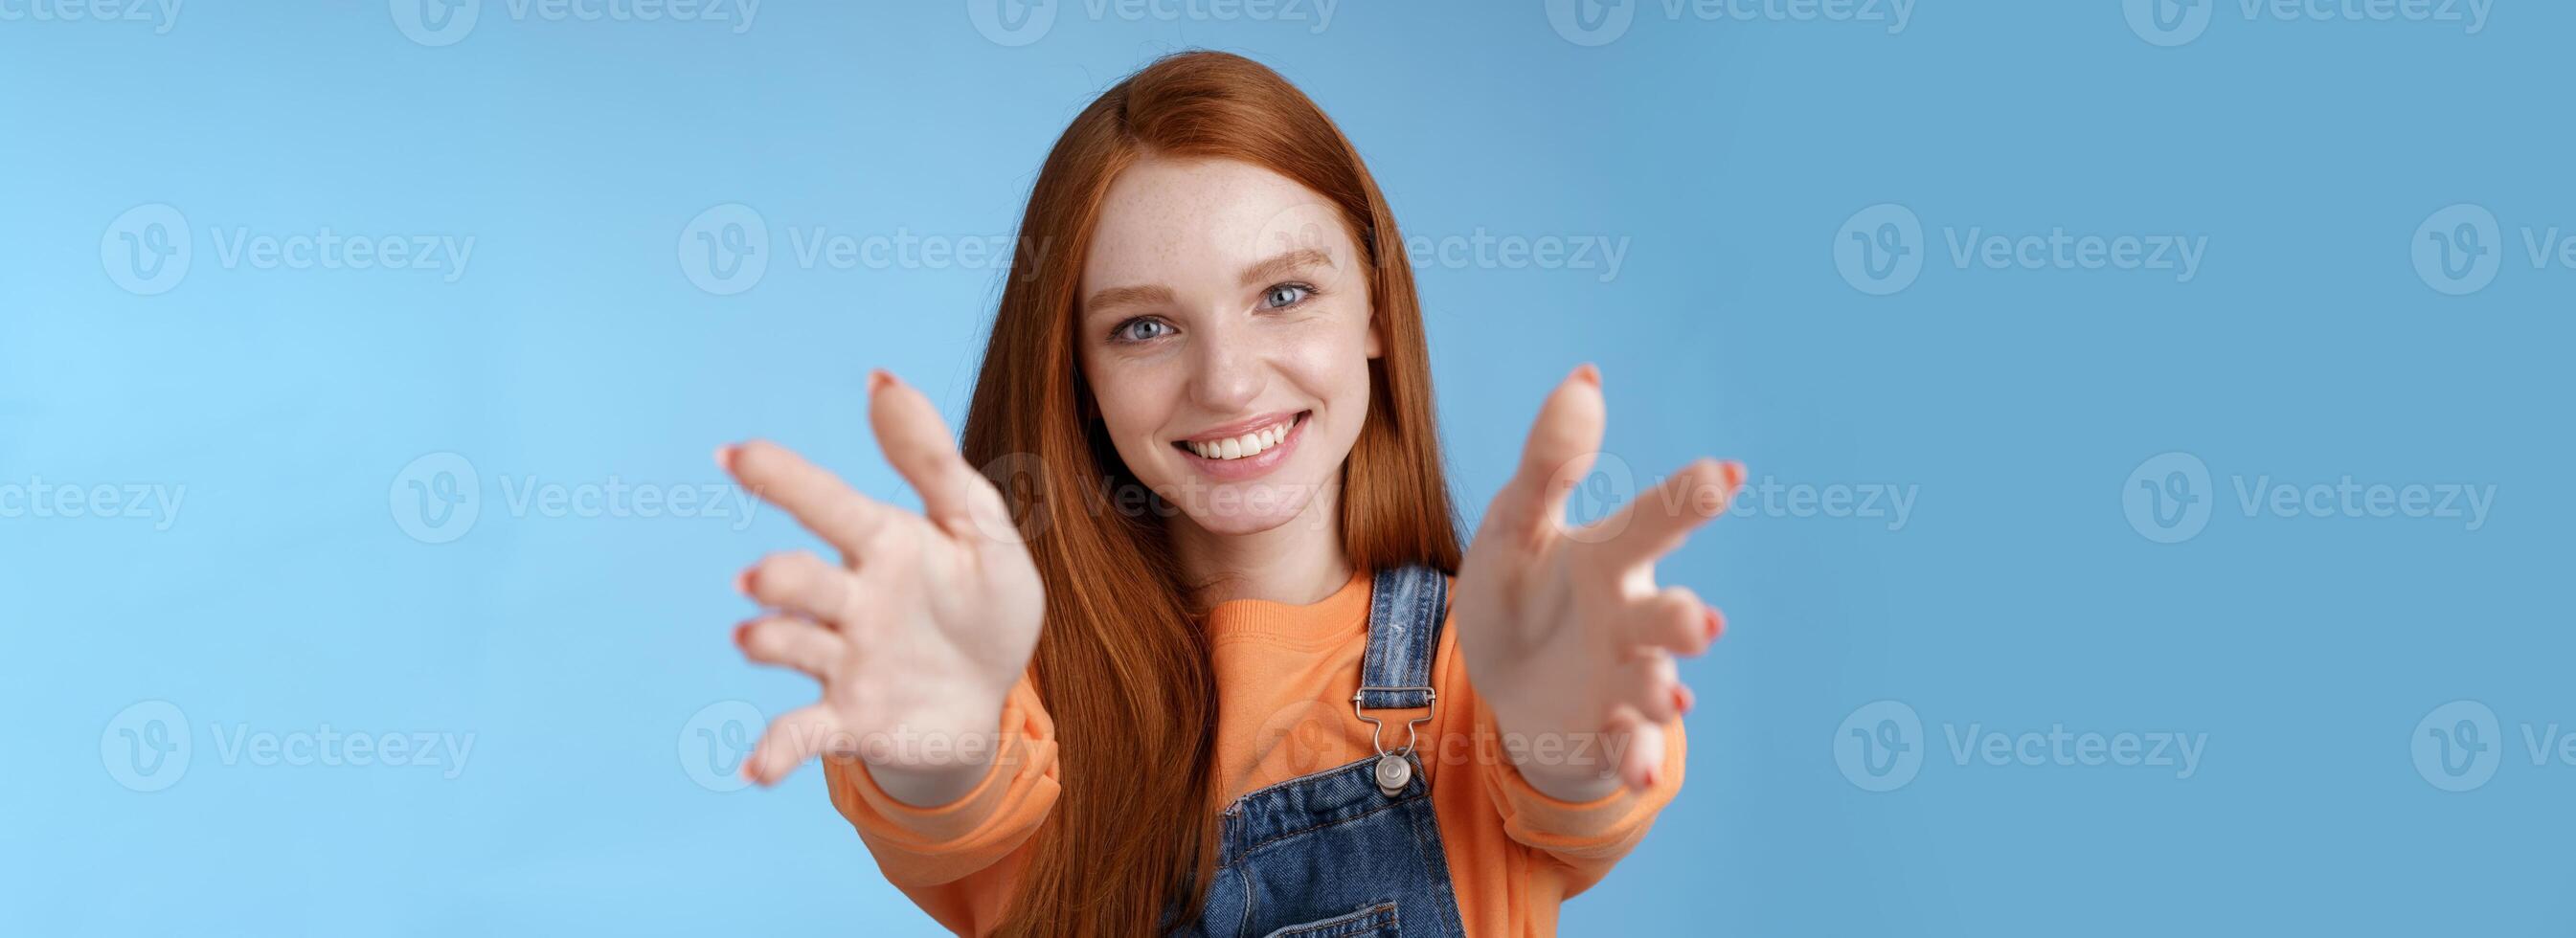 Come into arms. Charming sincere happy kind redhead girl baby sitting stretch hands camera wanna hold catch smiling friendly asking pass object, standing blue background reach friend give cuddles photo